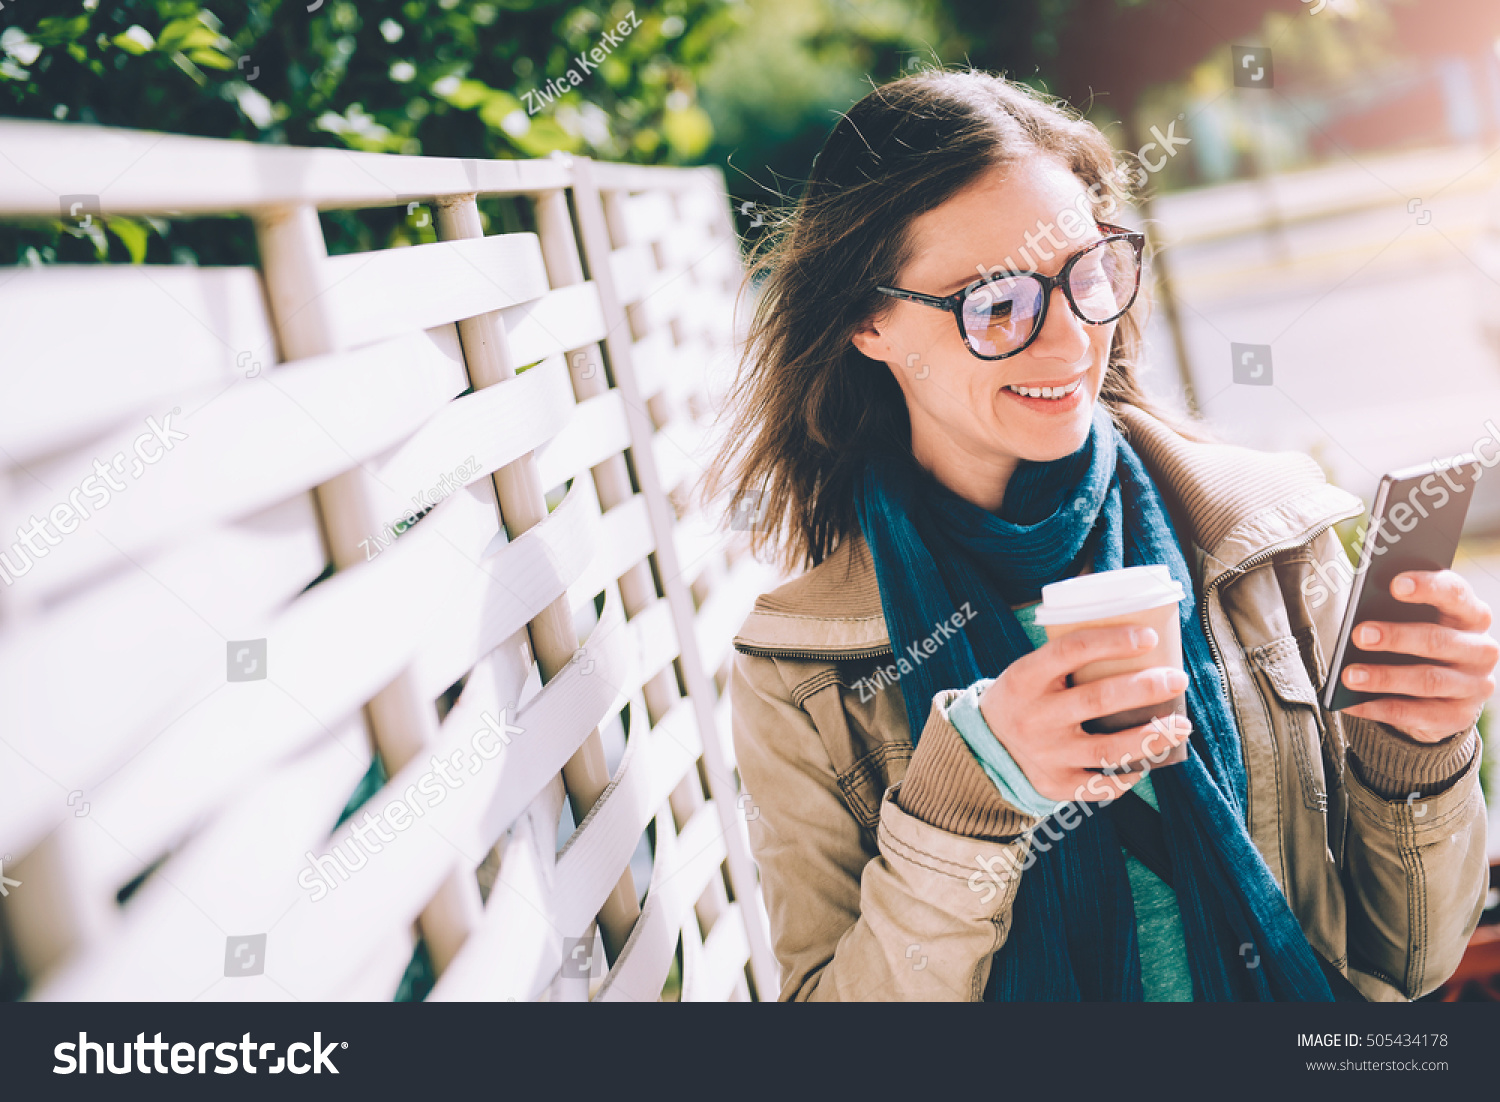 Woman holding takeaway coffee and using smart phone outdoor #505434178